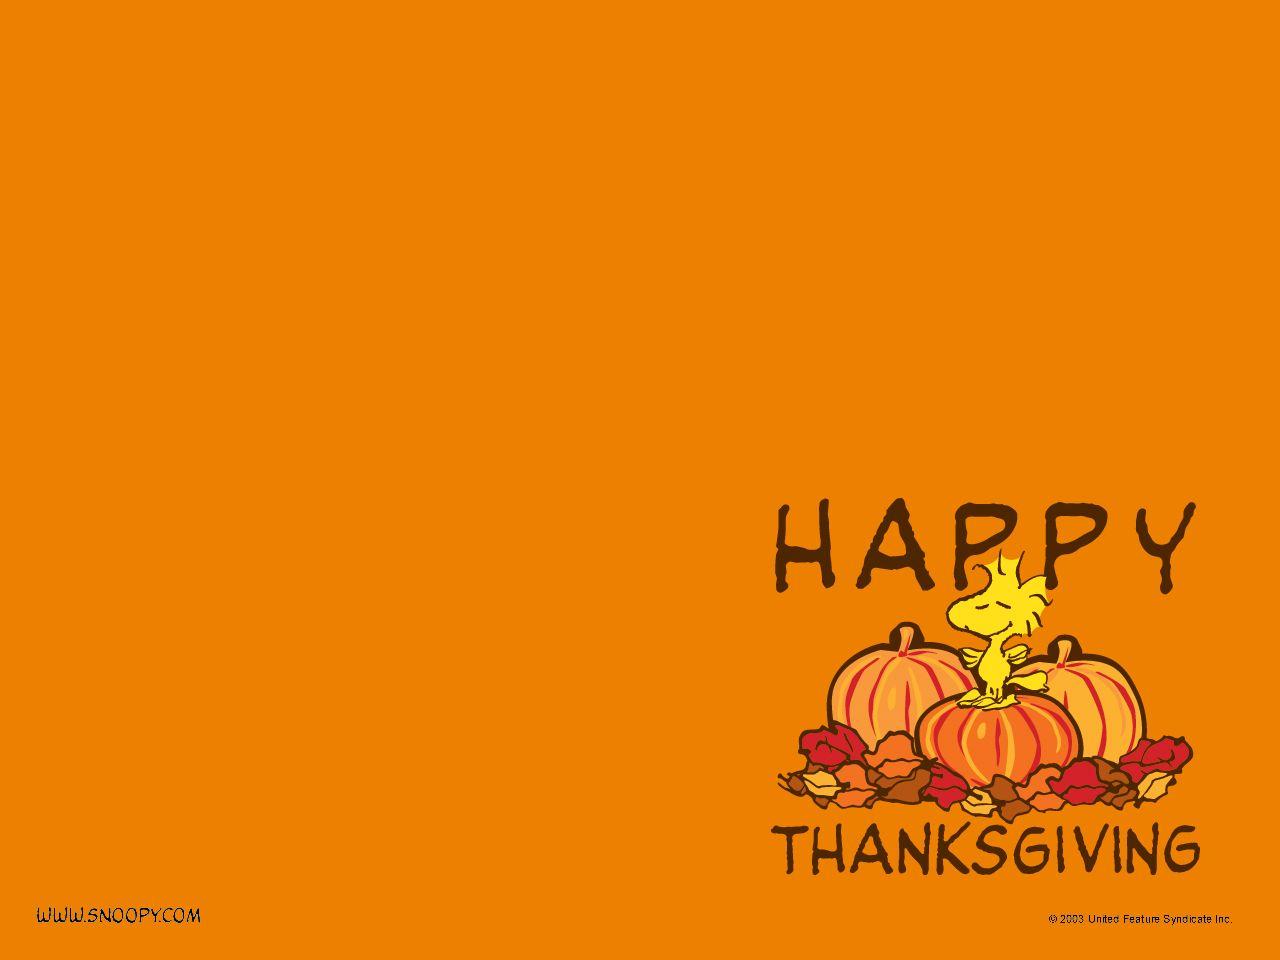 Thanksgiving Wallpaper for Computers